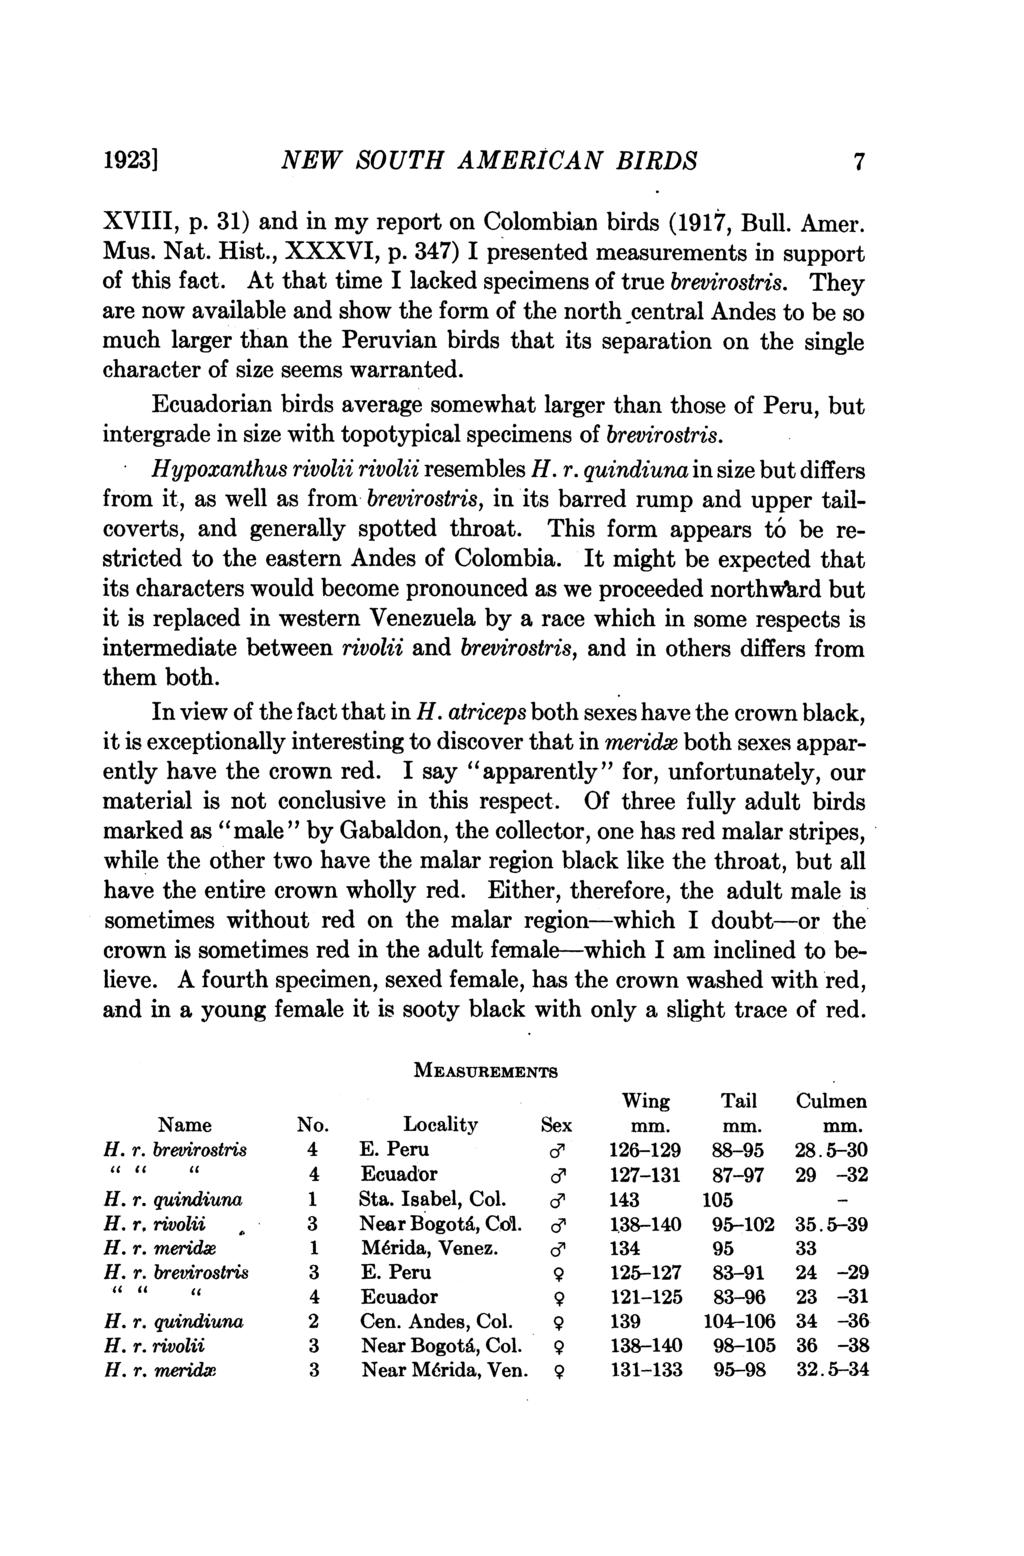 1923] NEW SOUTH AMERICAN BIRDS 7 XVIII, p. 31) and in my report on Colombian birds (1917, Bull. Amer. Mus. Nat. Hist., XXXVI, p. 347) I presented measurements in support of this fact.